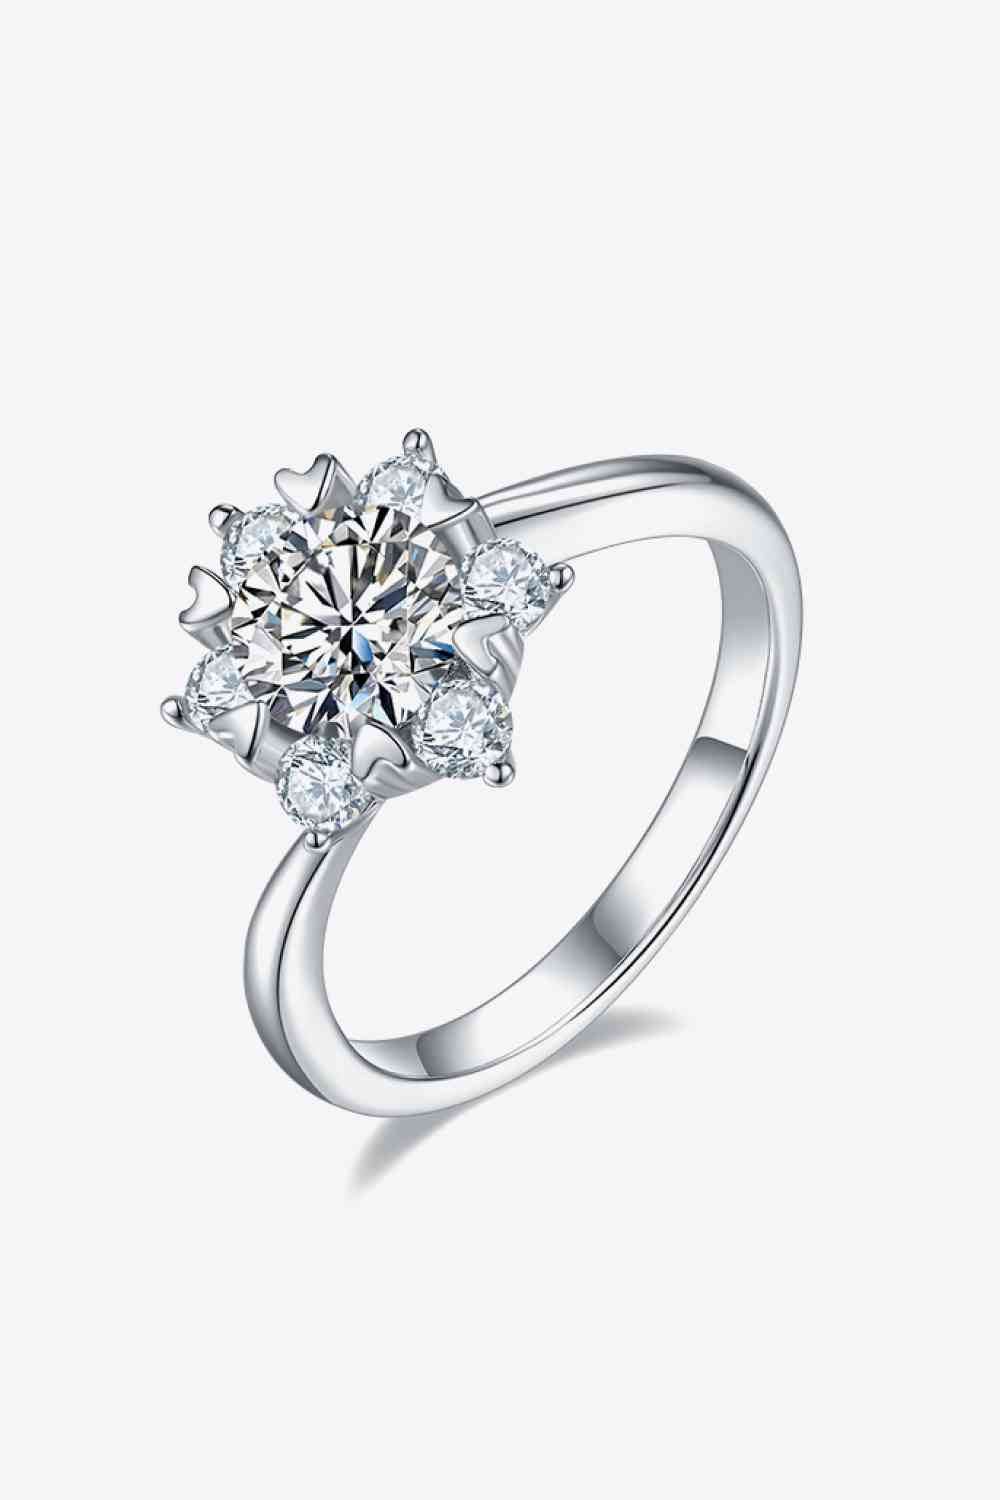 Adored 1 Carat Moissanite 925 Sterling Silver Cluster Ring Silver